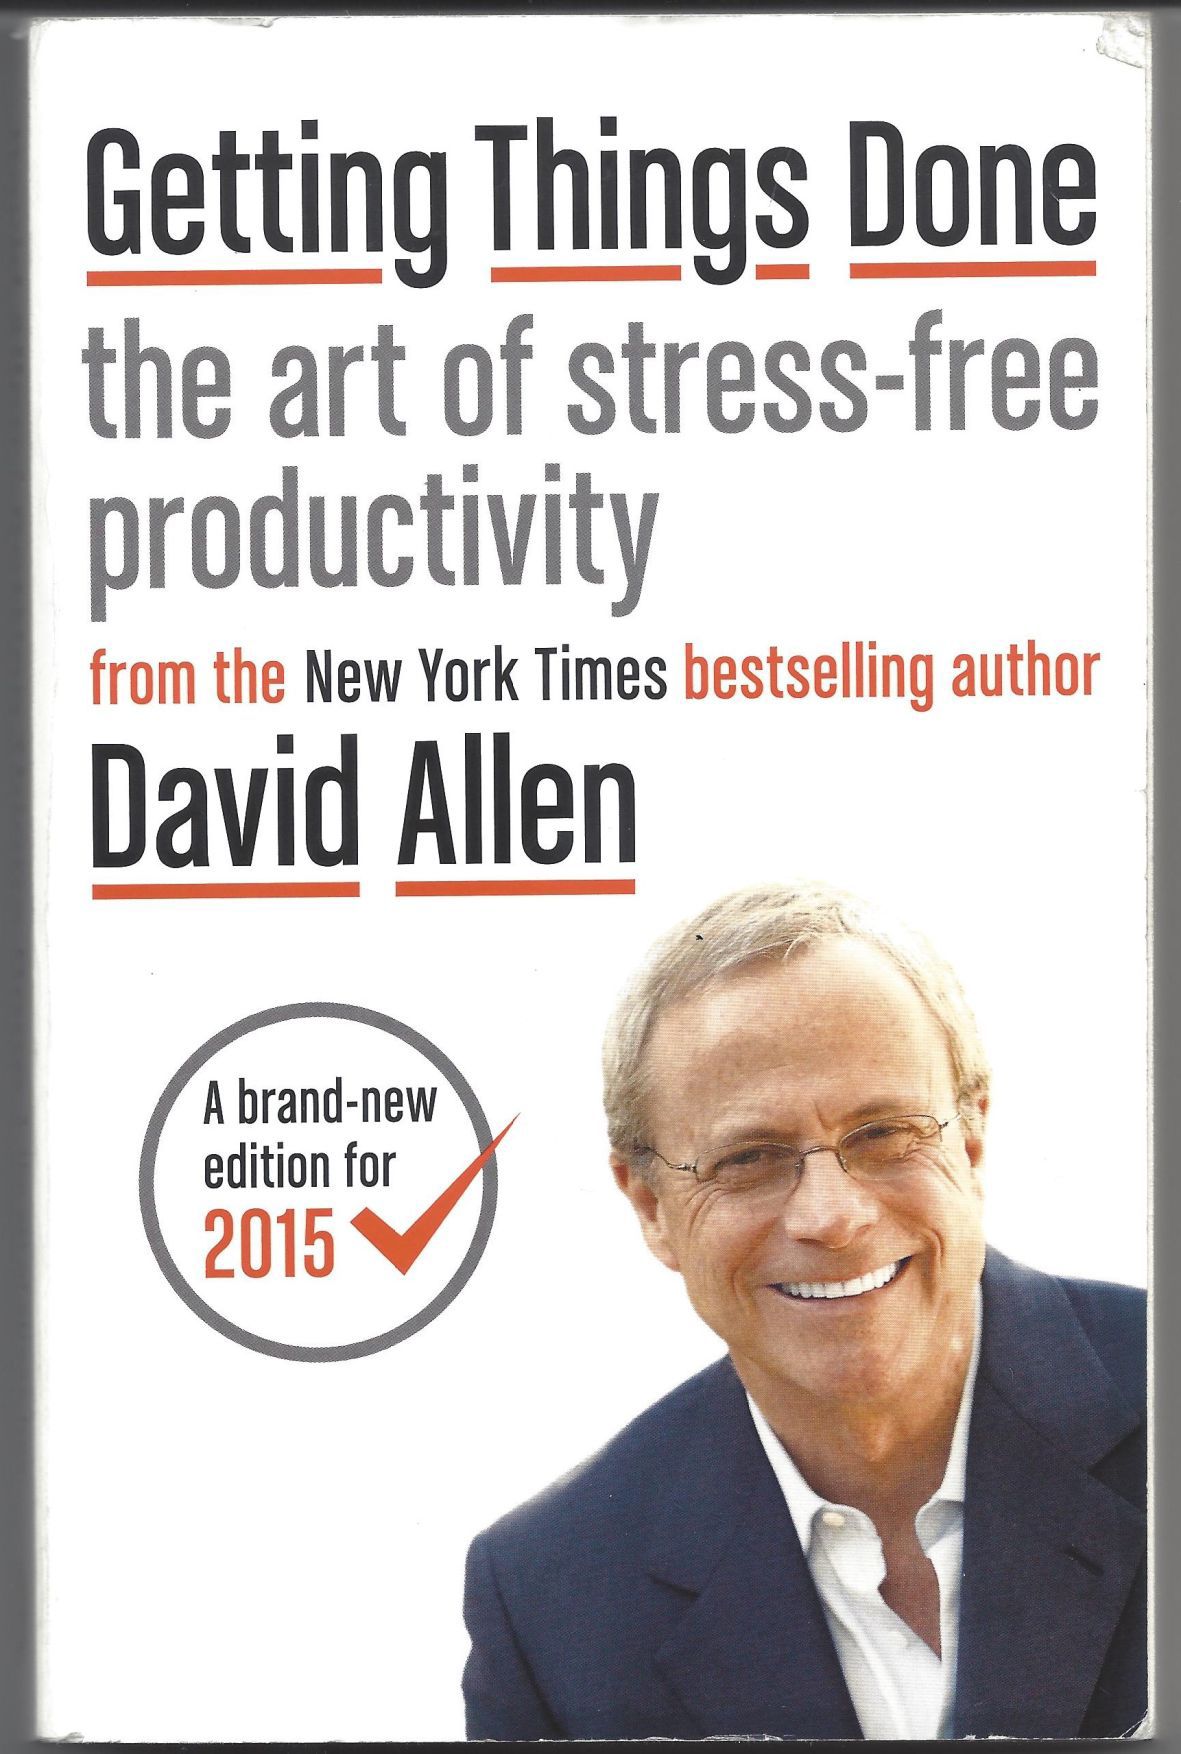 David Allen “Getting Things Done: The Art of Stress-Free Productivity”